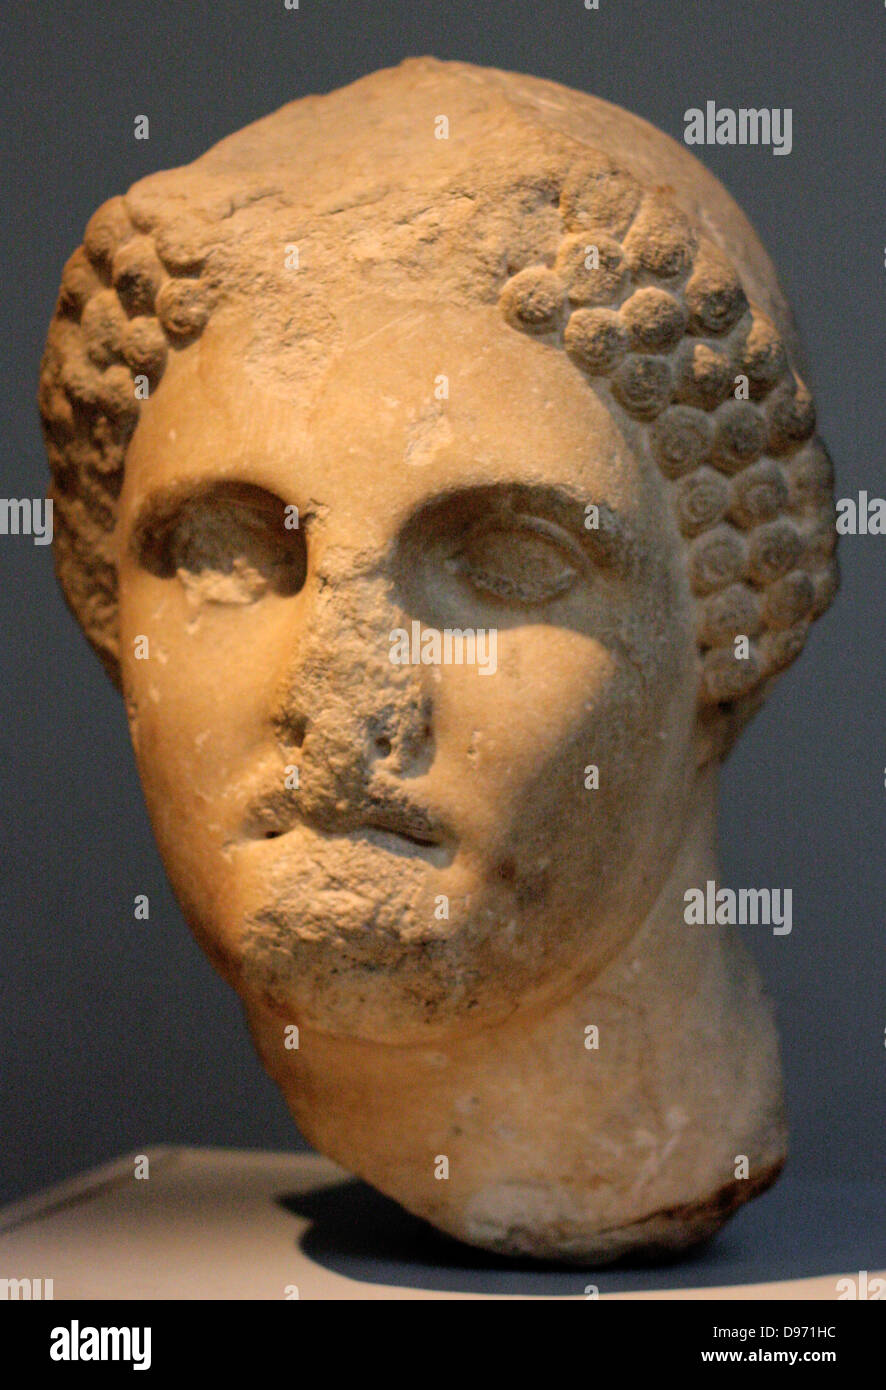 Head from a colossal statue of a woman wearing a sakko (cap) Parian marble found to the north west of the Mausoleum, about 350 BC The head comes from a statue of similar size to the colossal female figure displayed in this room (the-so-called Artemisia, Sculpture (100). This portrait may represent one of the female members of the Hekatomnid dynasty. The series of Dynastic portraits probably stood between the Ionic columns of the peristyle. Stock Photo